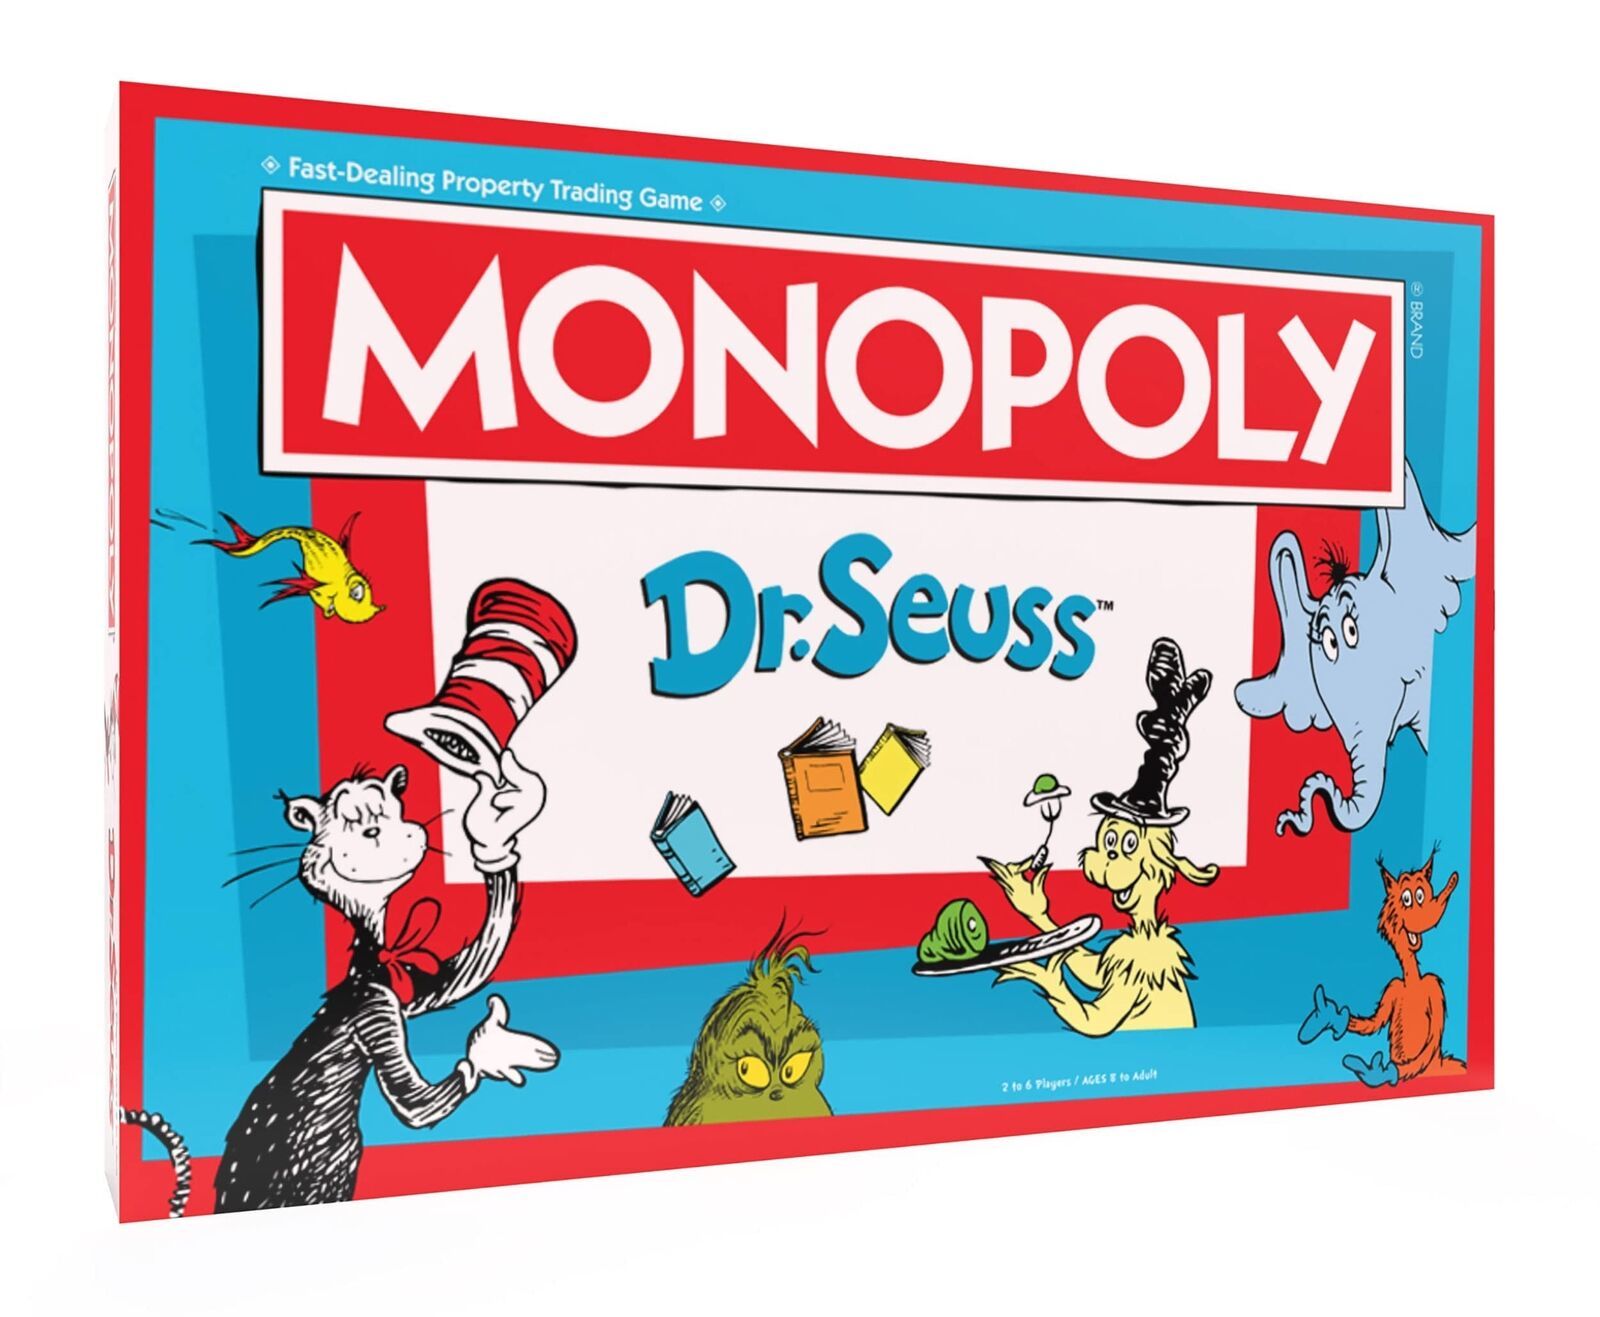 Monopoly: Dr. Seuss | Buy, Sell, Trade Dr. Seuss Books | Collectible Classic ... - $34.25